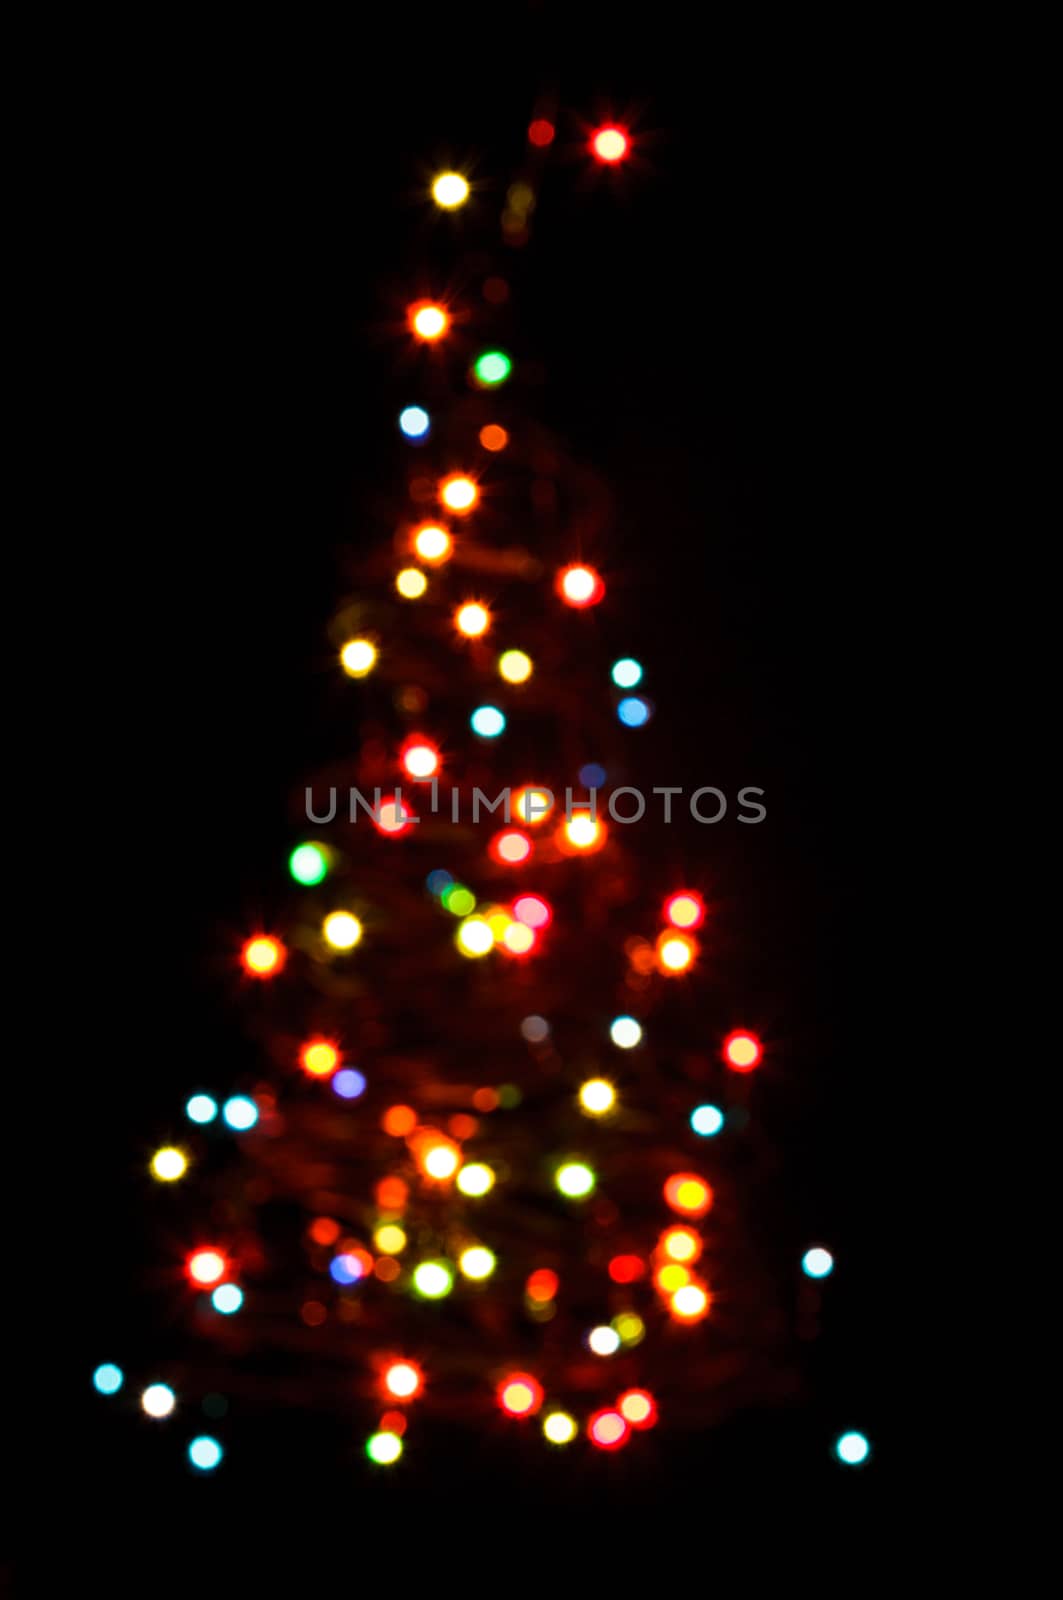 Blurred colorful lights as a silhouette of Christmas tree on black